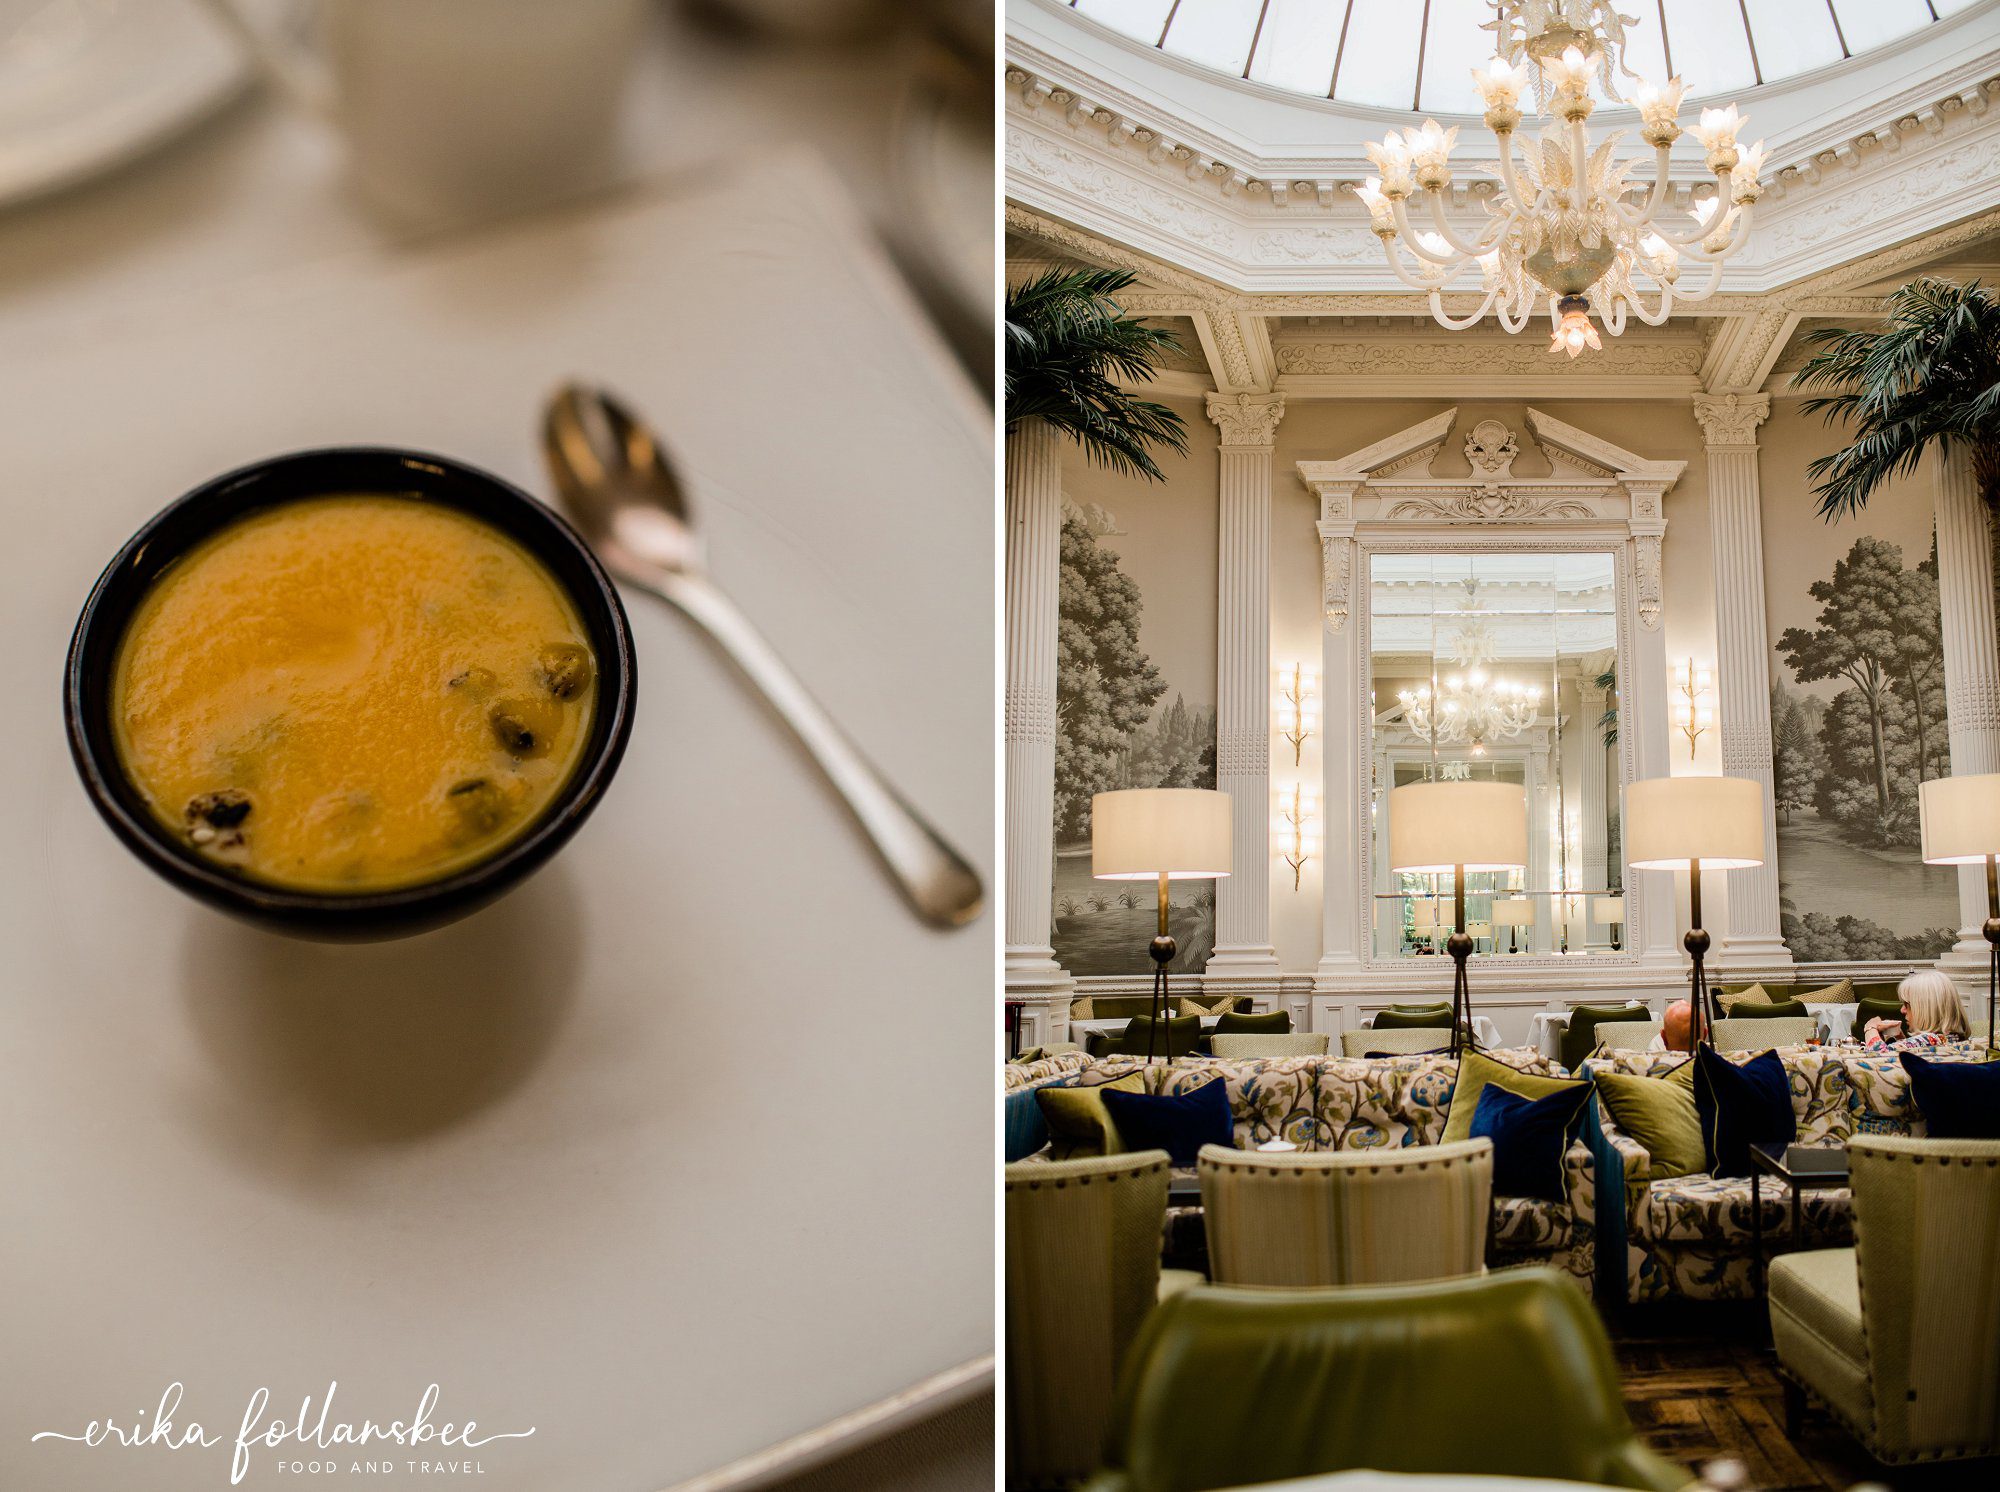 Afternoon tea at the Balmoral Hotel, Palm Court, in Edinburgh, Scotland